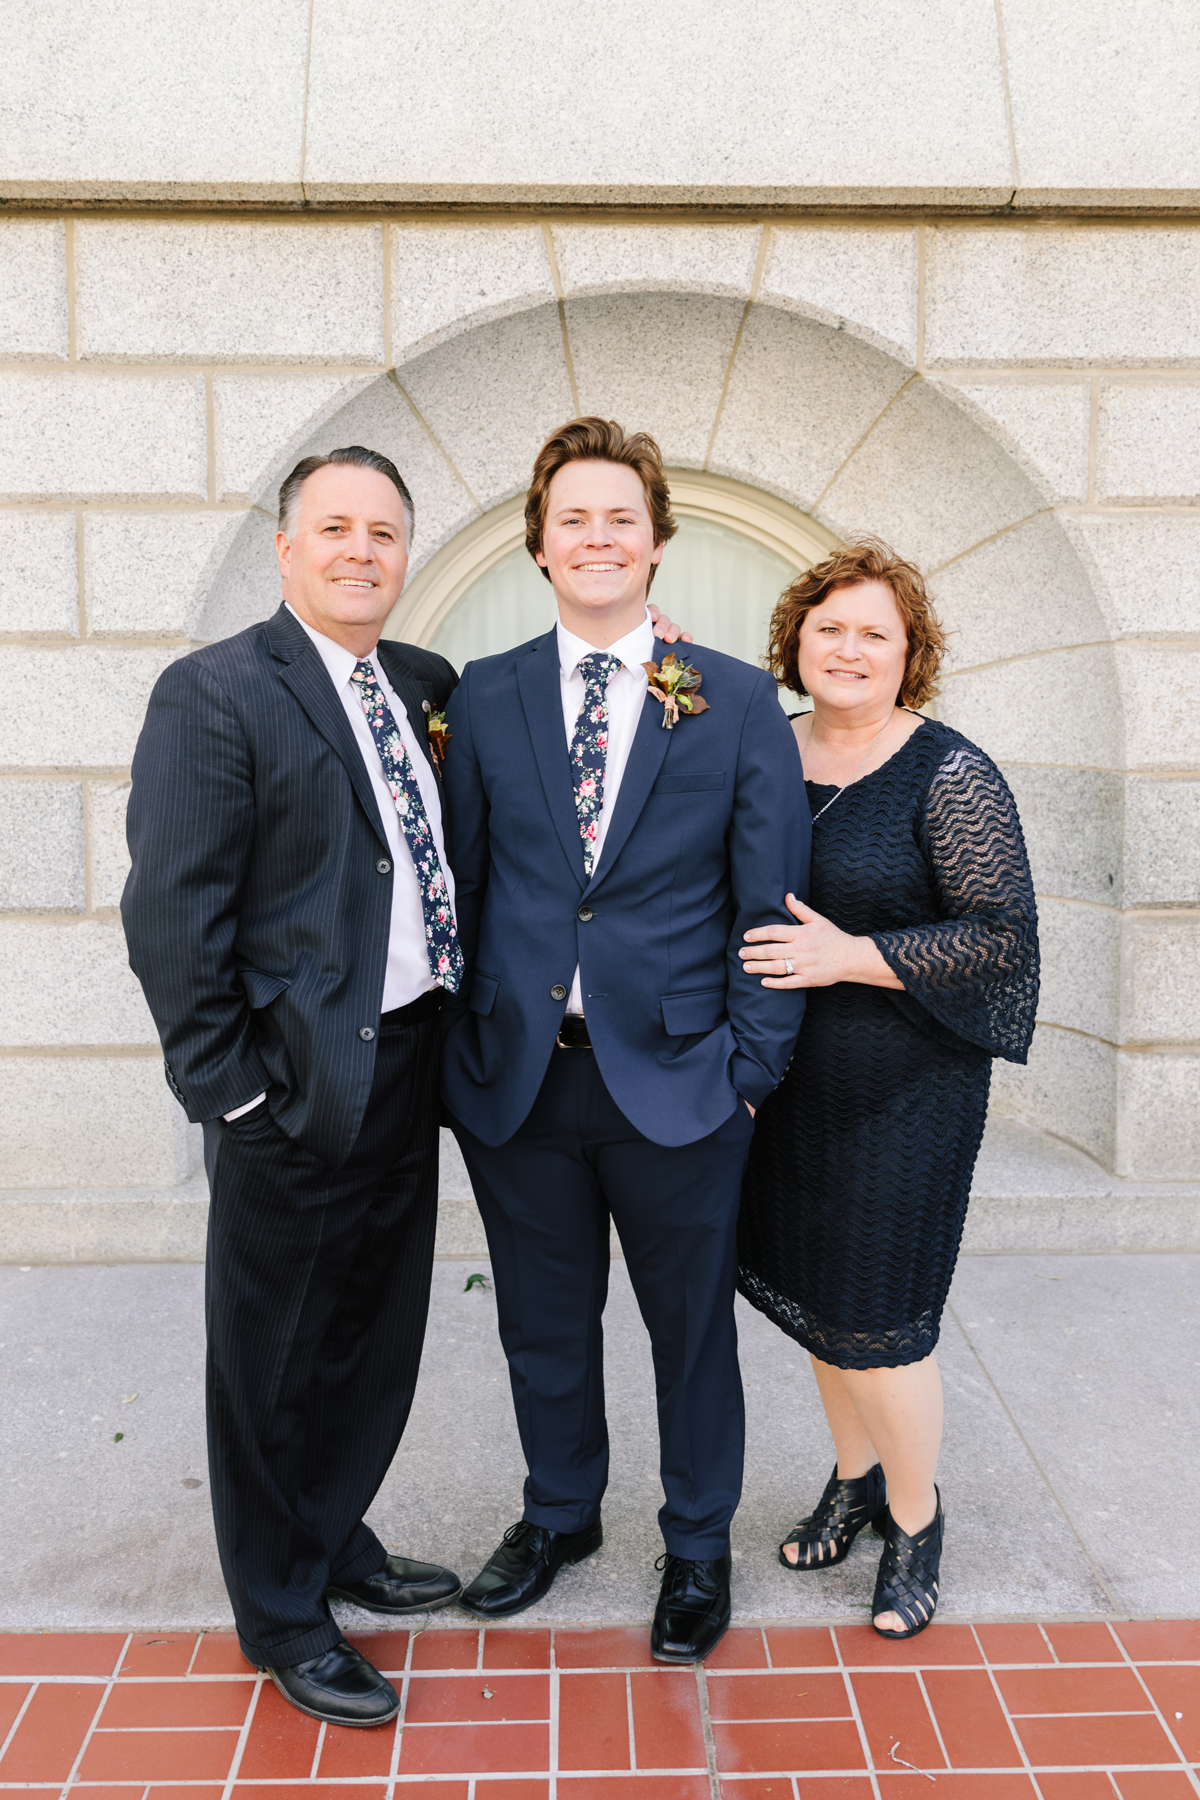  wedding day family pictures groom parents just married salt lake city lds temple utah valley wedding photographer professional just #weddinginspo #bridetips #isaidyes #ido #utahvalleyweddingphotographer #utah #saltlakecityweddingphotographer #saltla